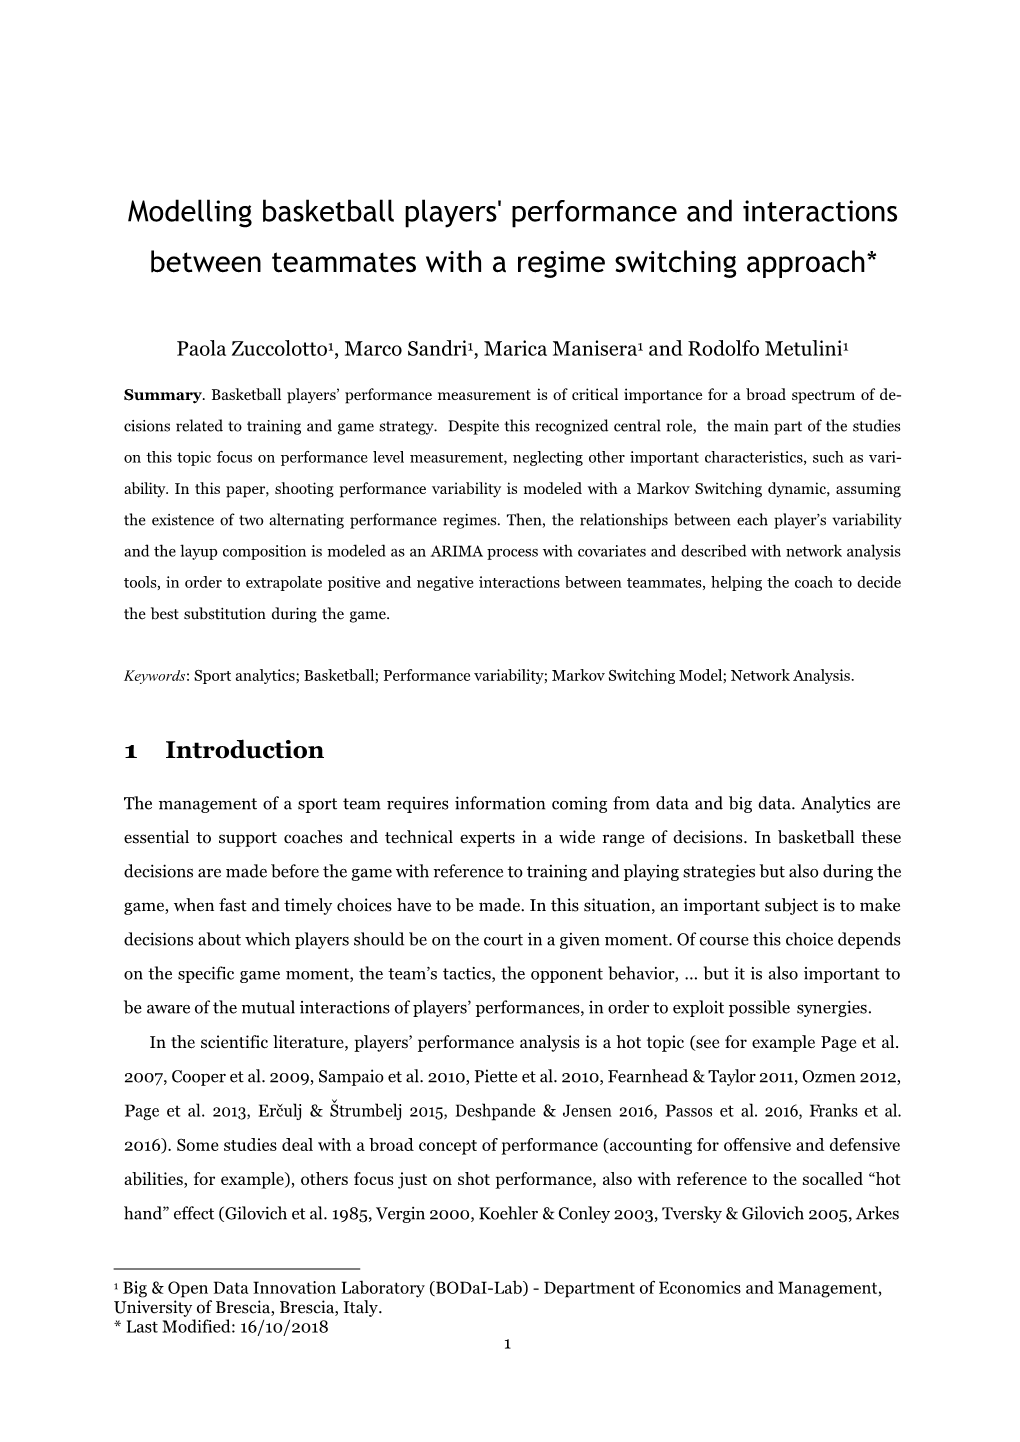 Modelling Basketball Players' Performance and Interactions Between Teammates with a Regime Switching Approach*